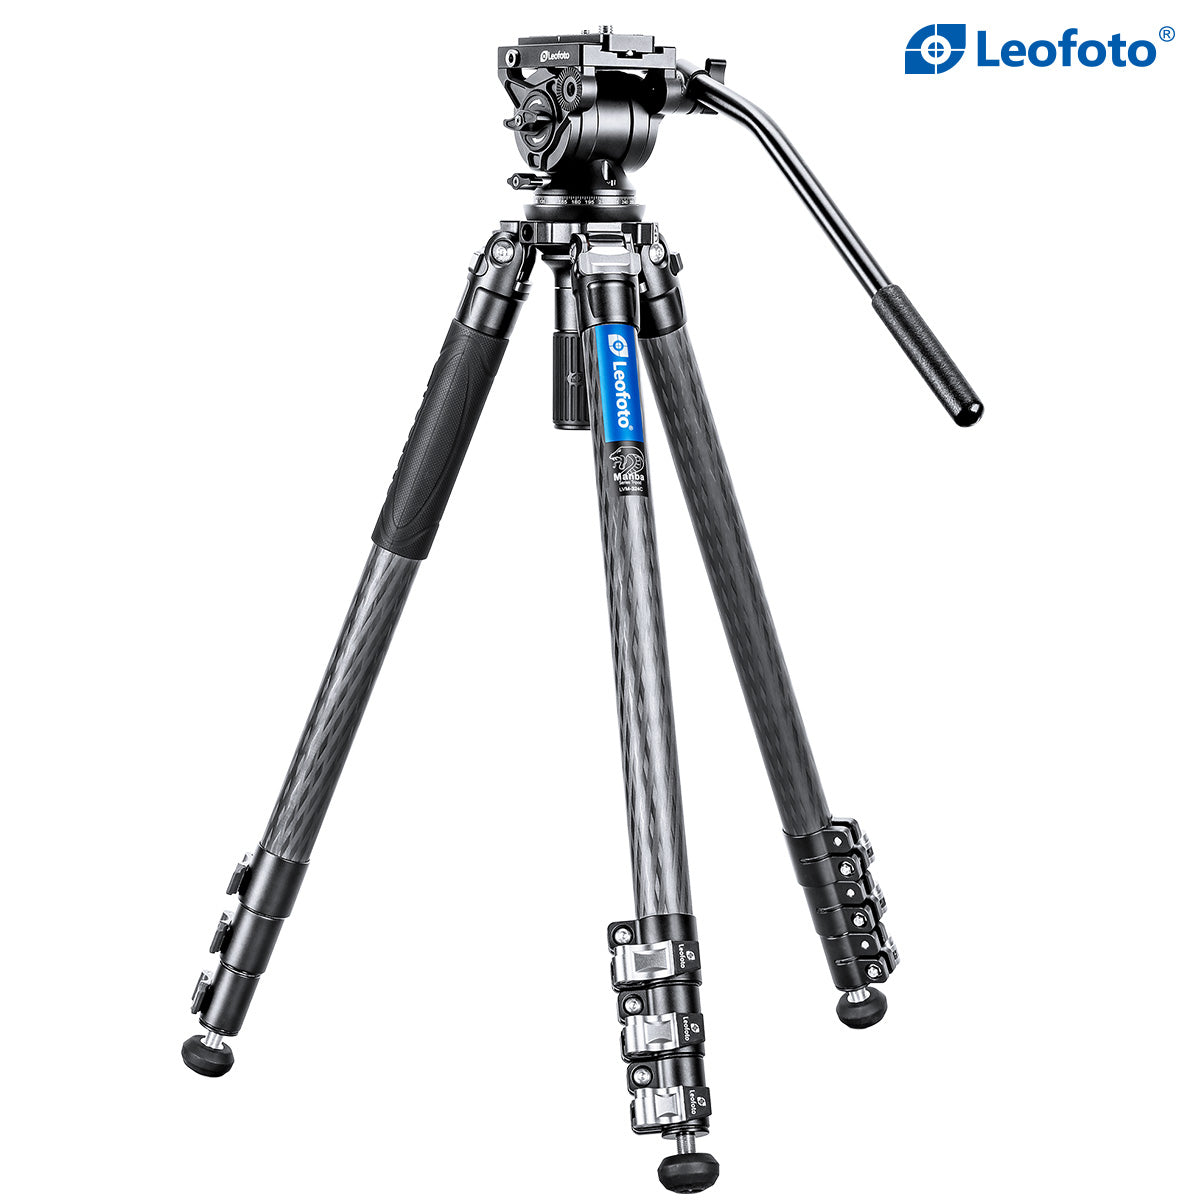 Leofoto LVM-324C+BV-10 4-Section Carbon Fiber Video Tripod with Fluid Head Set | 75mm Integrated Bowl with Leveling Base and Handle